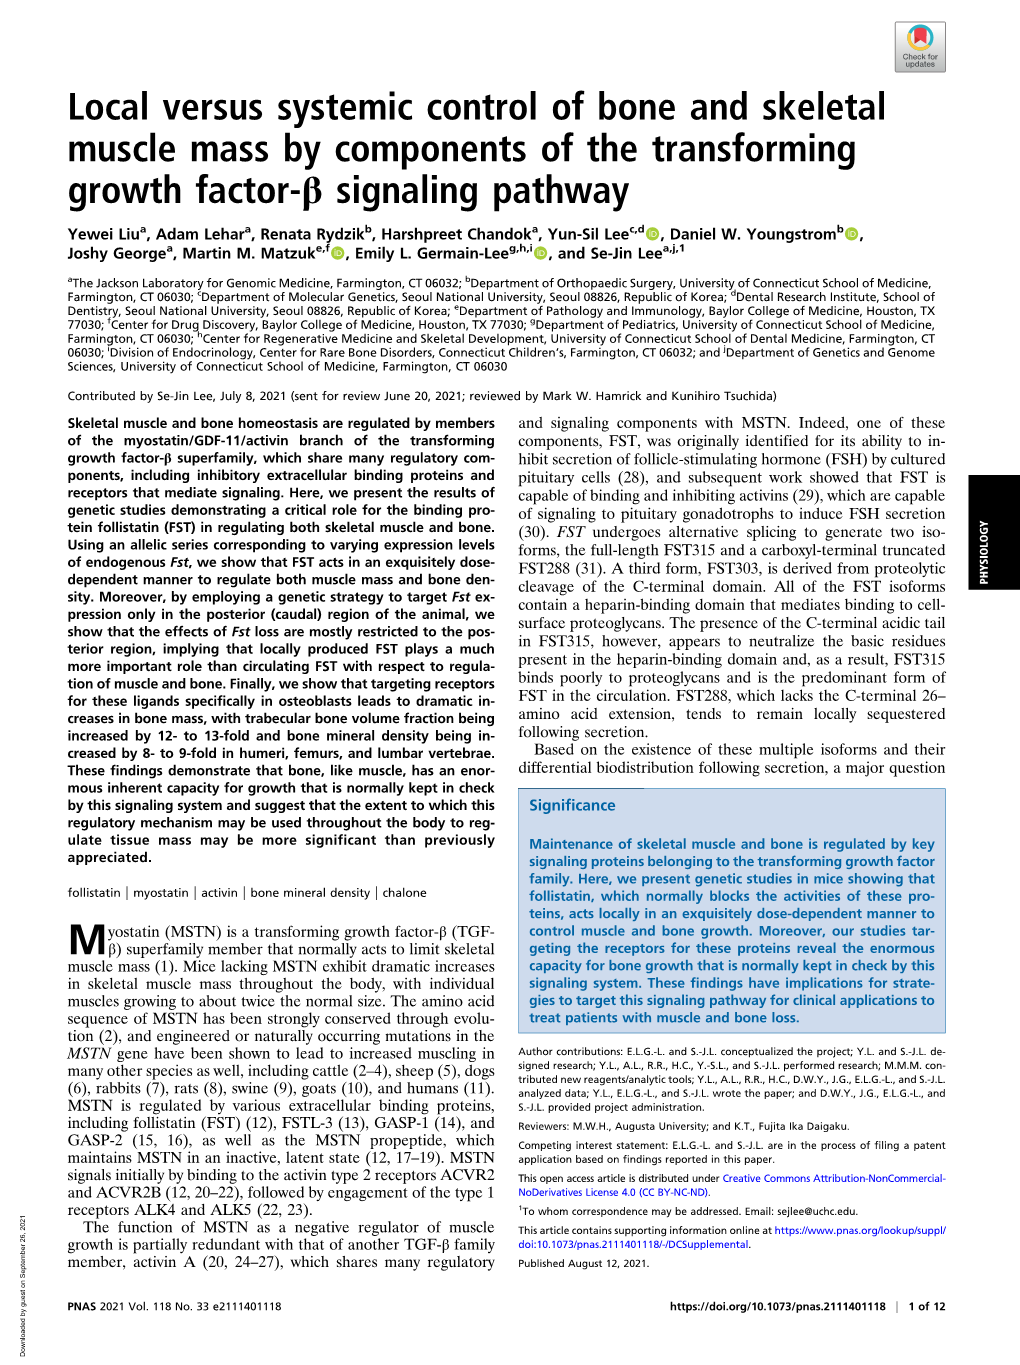 Local Versus Systemic Control of Bone and Skeletal Muscle Mass by Components of the Transforming Growth Factor-Β Signaling Pathway